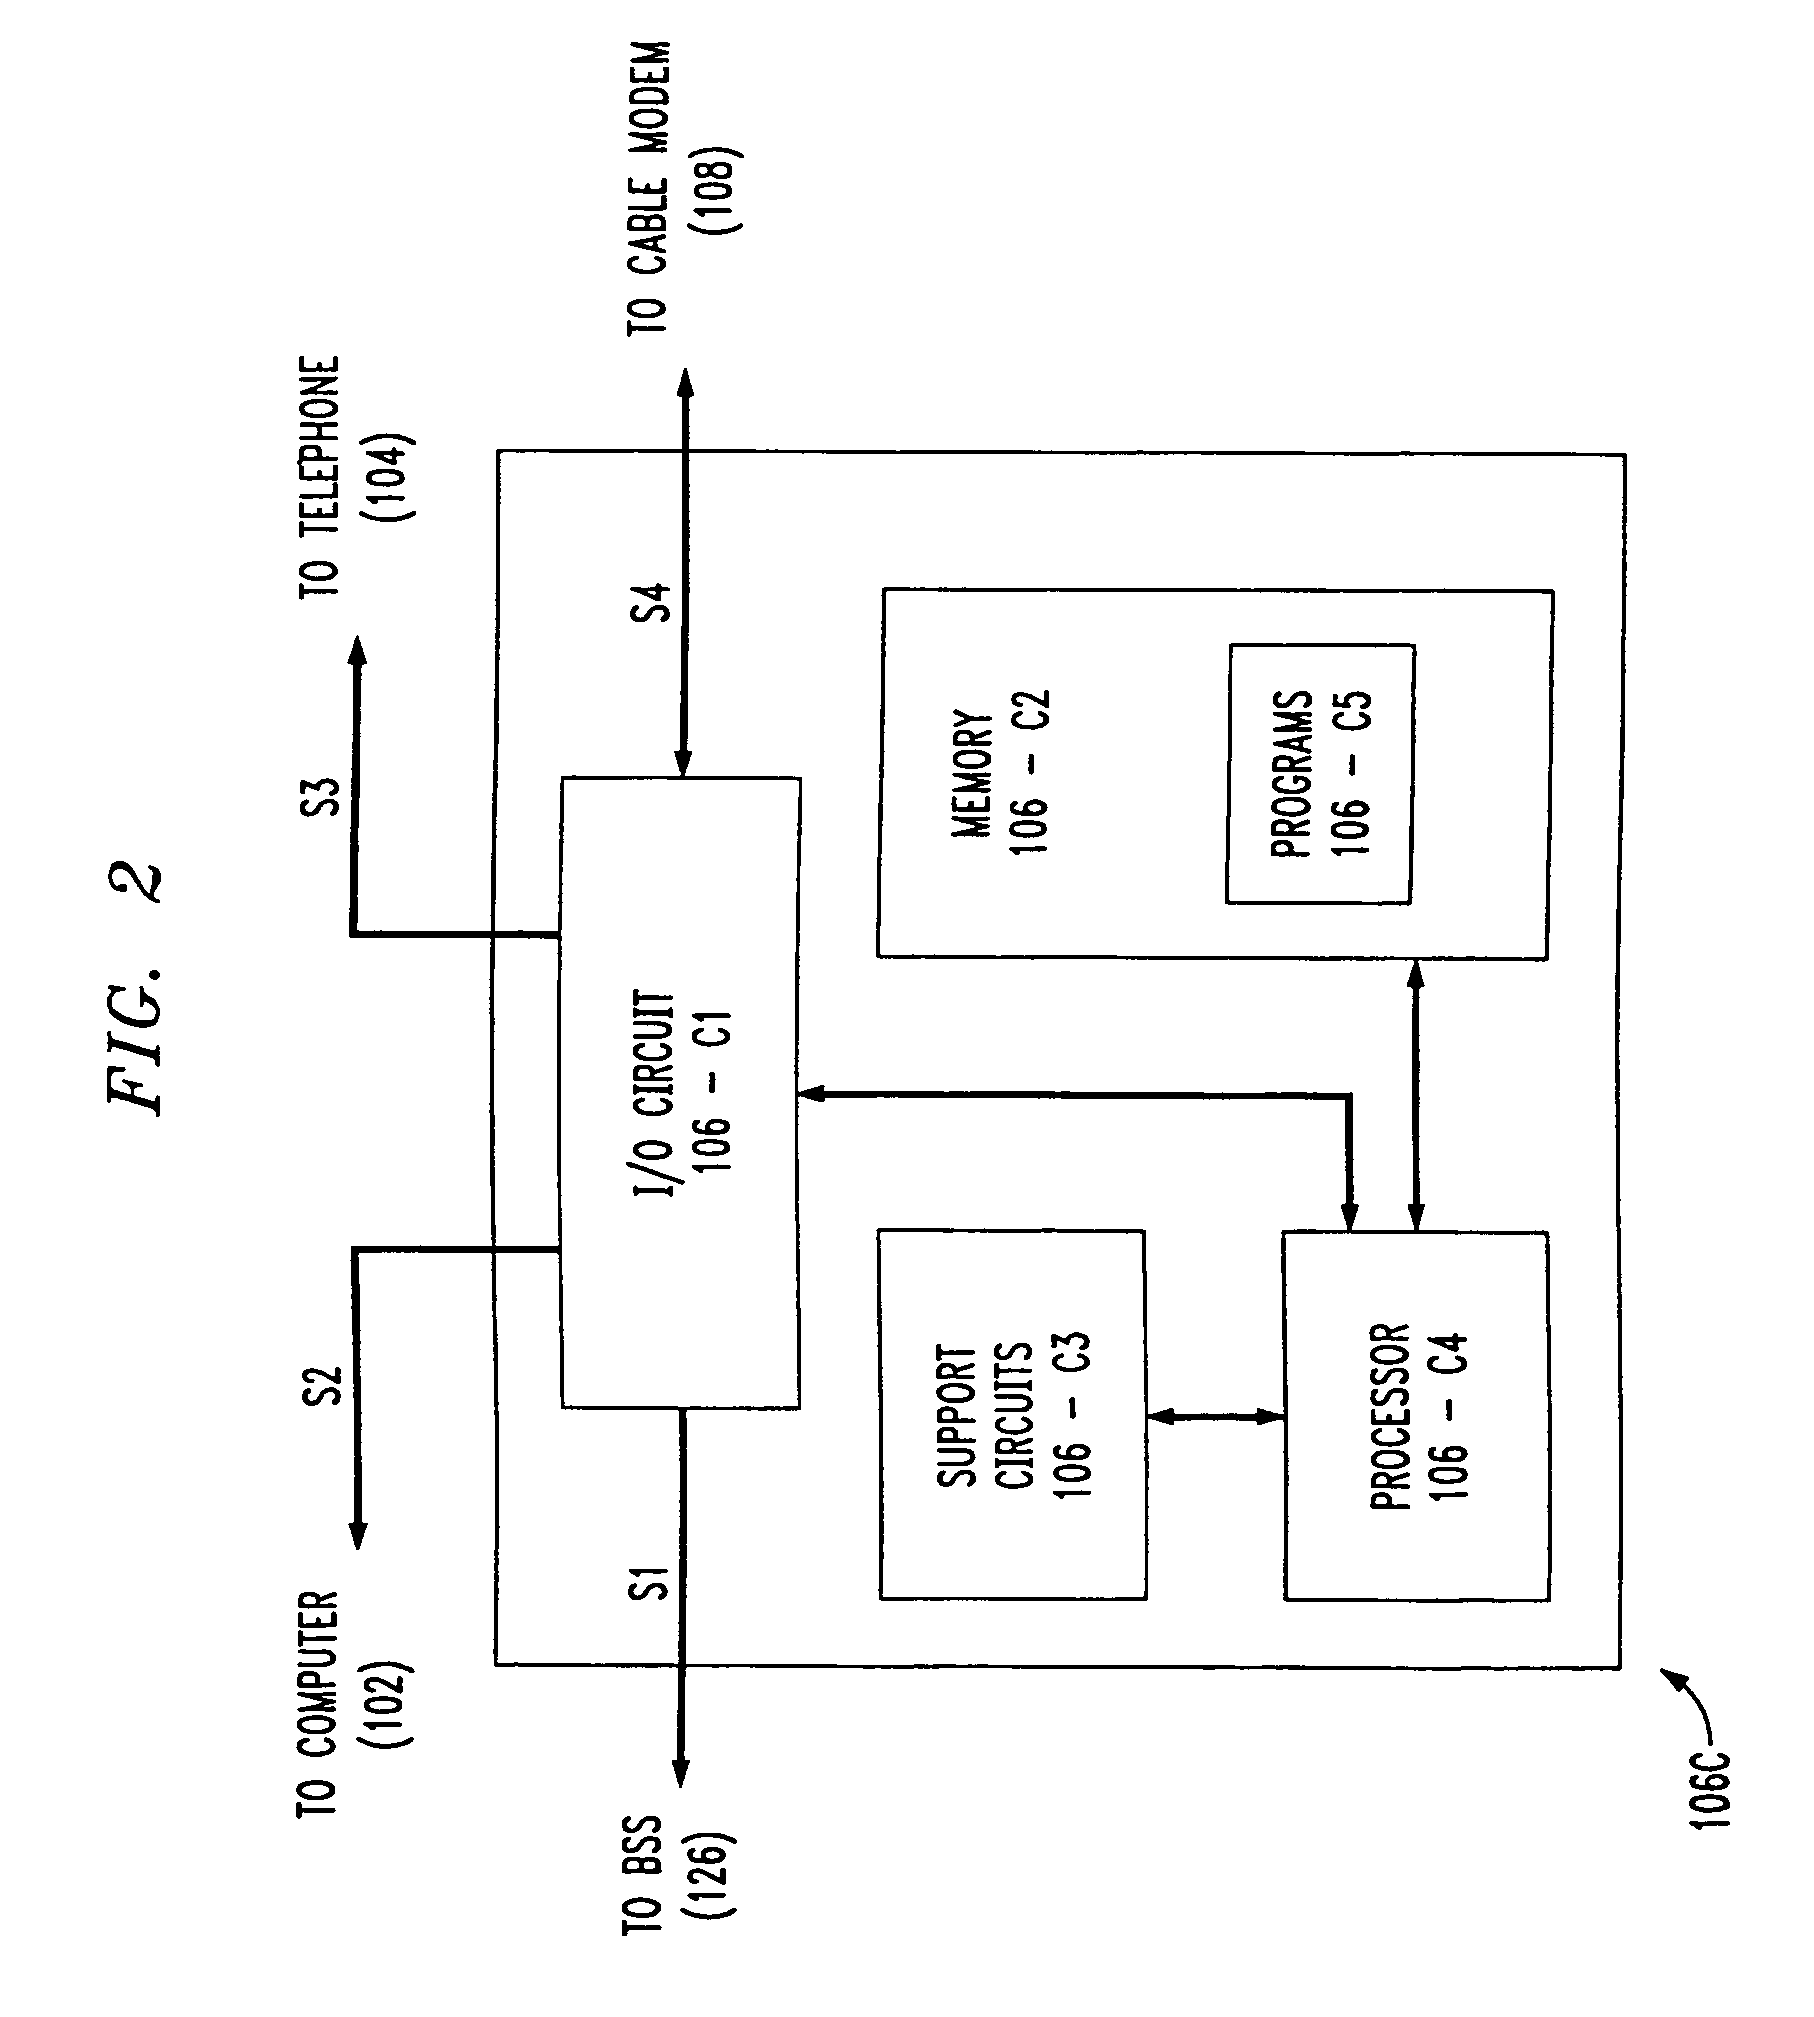 Method and apparatus for providing bifurcated transport of signaling and informational voice traffic